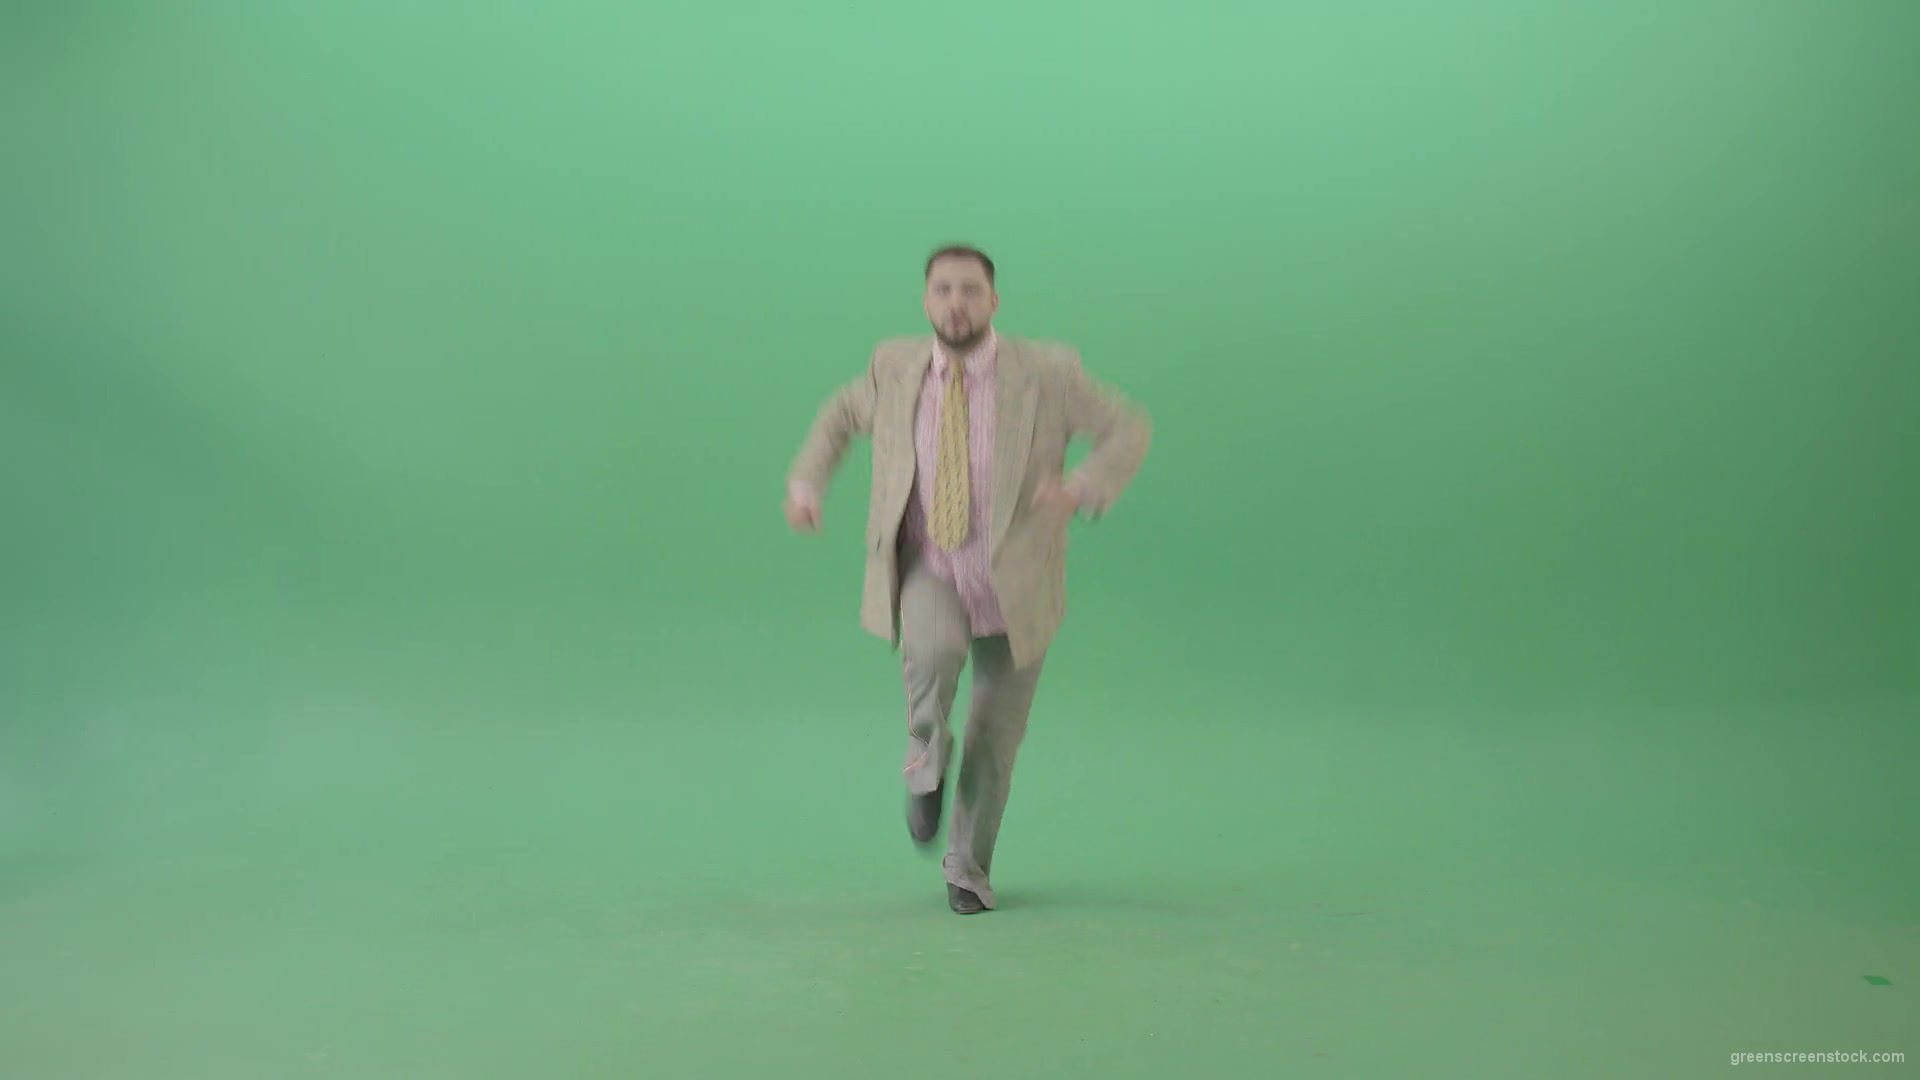 Man-dancing-shuffle-jazz-swing-Boogie-woogie-and-jumping-isolated-over-Green-Screen-4K-Video-Footage-1920_007 Green Screen Stock